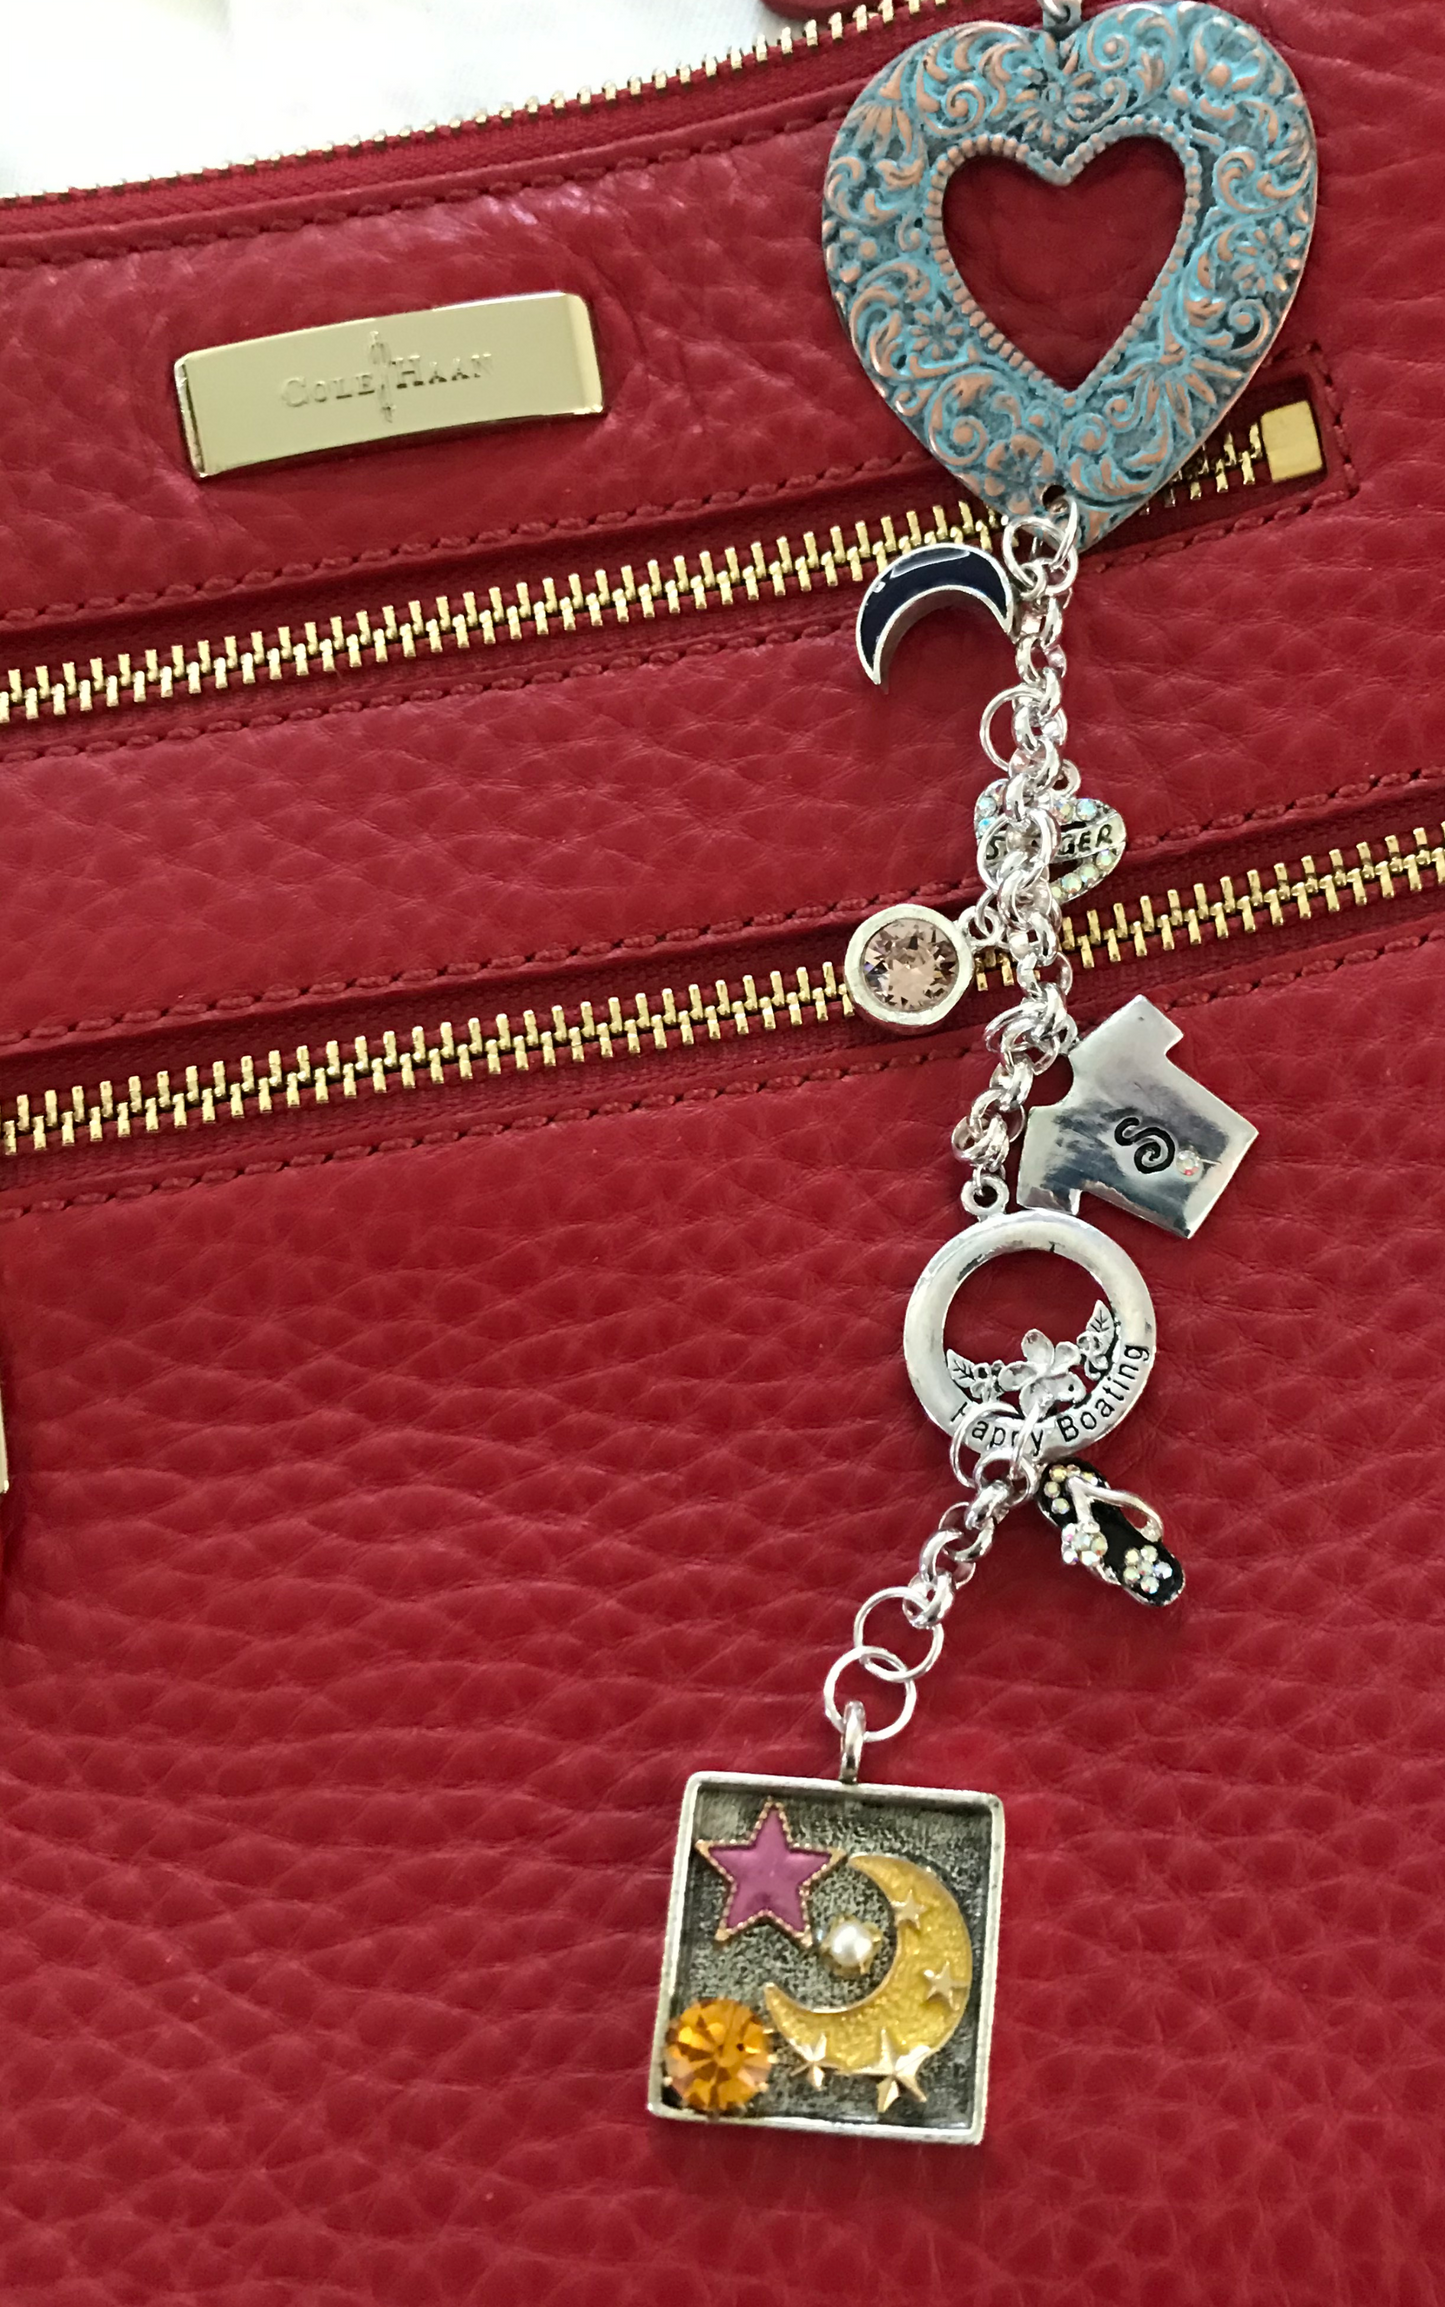 Sanger Boats Purse Charms